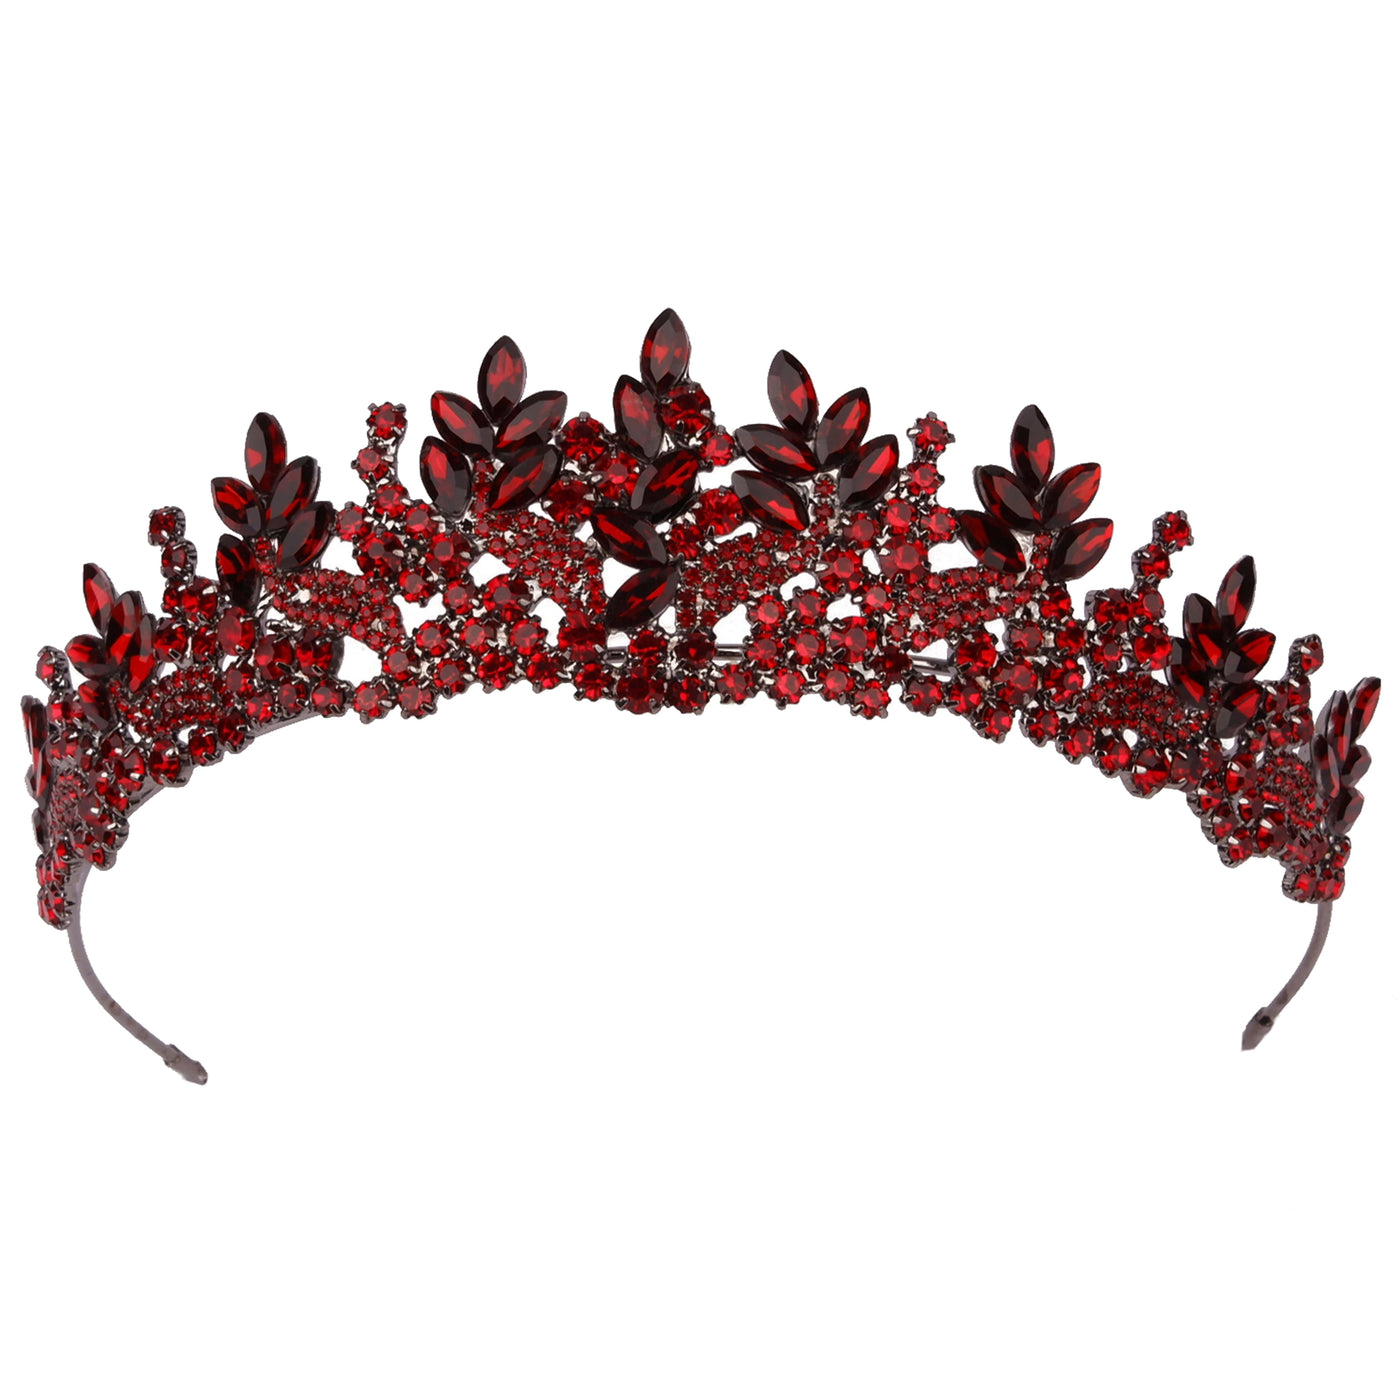 Crystal-Embellished Bridal Wedding Crown, Princess Tiara for Special Days and Parties